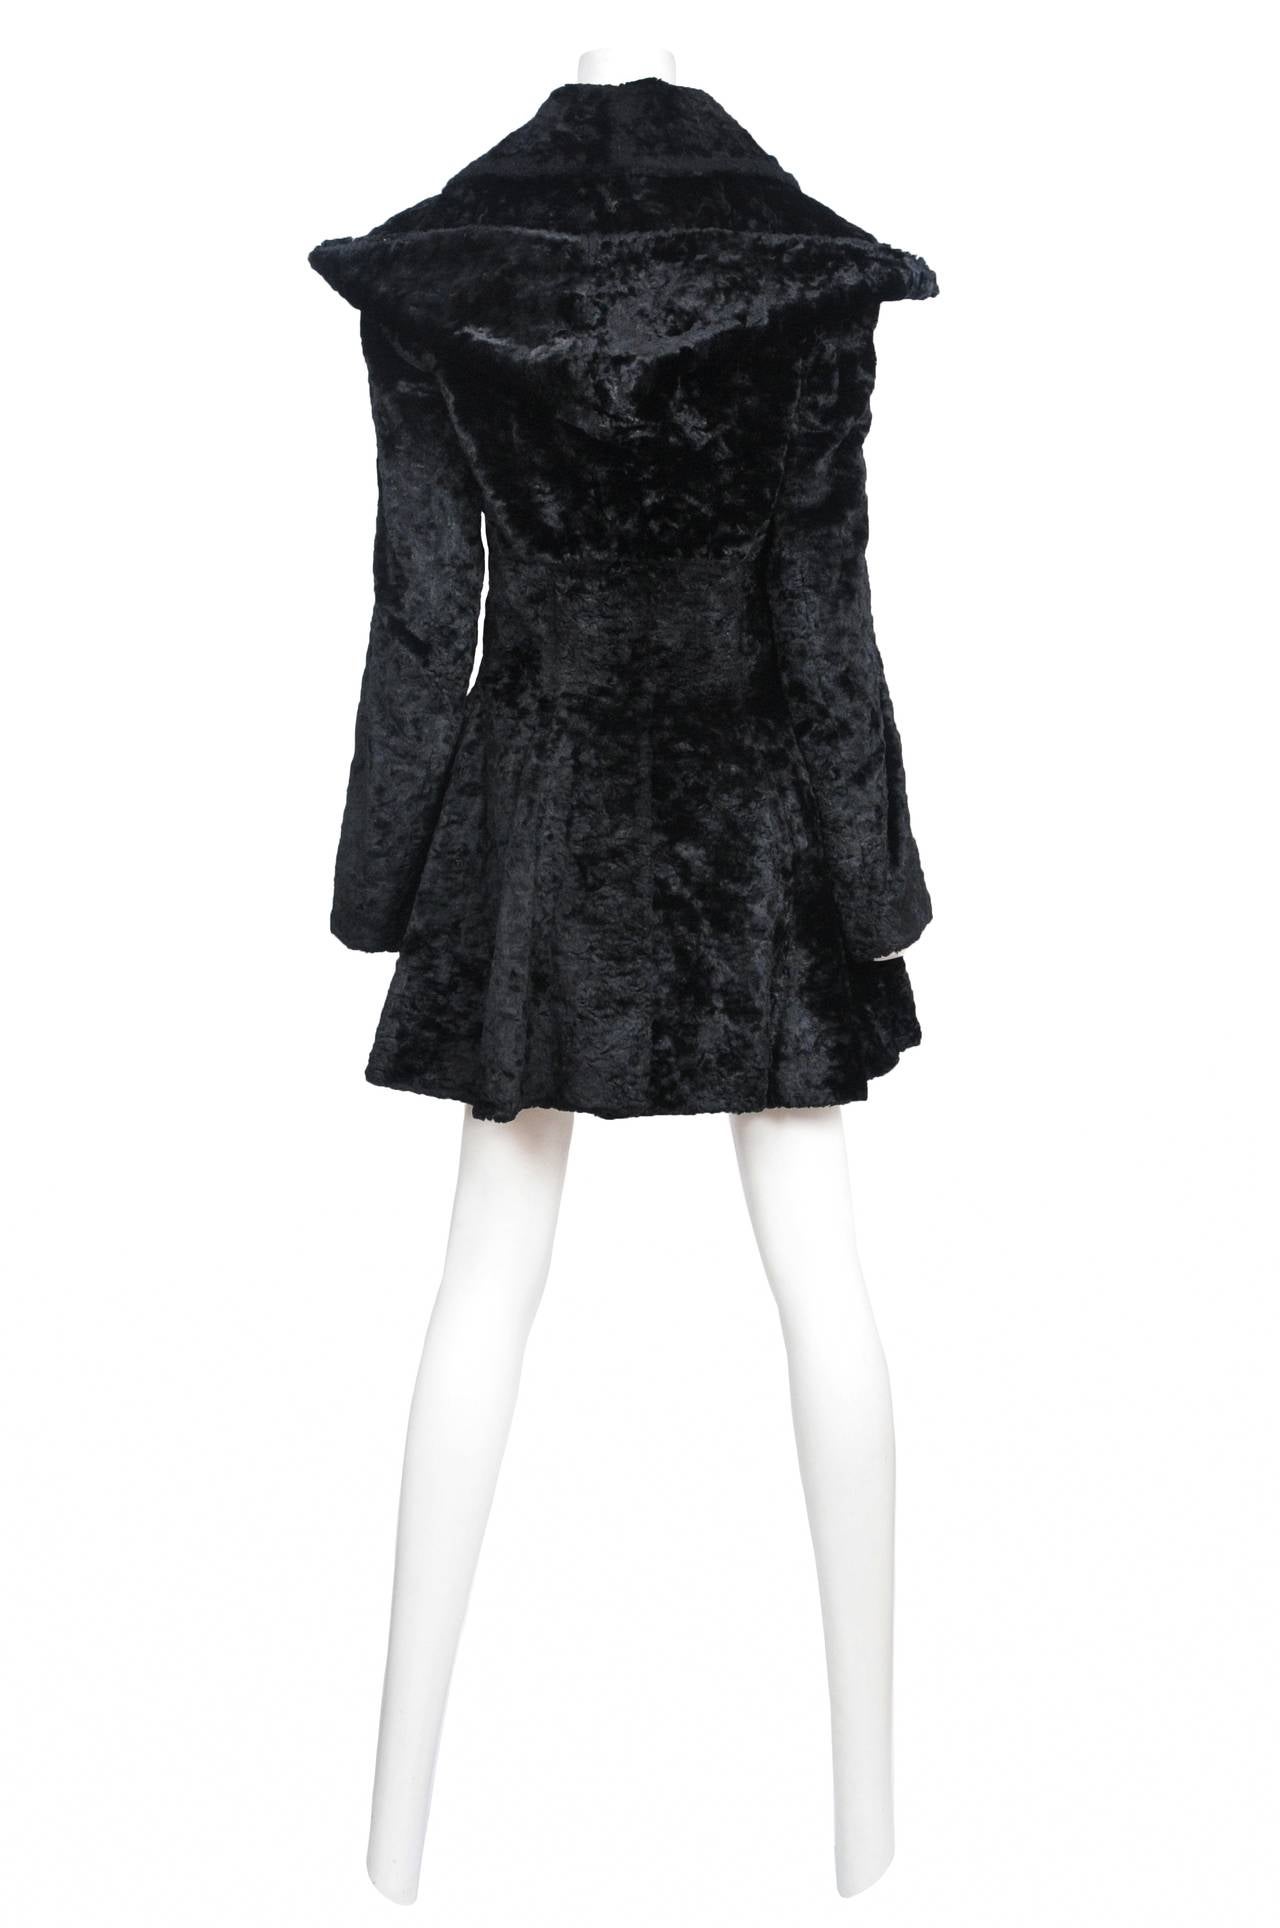 Vintage Azzedine Alaia black faux fur double breasted swing coat featuring a hooded collar.